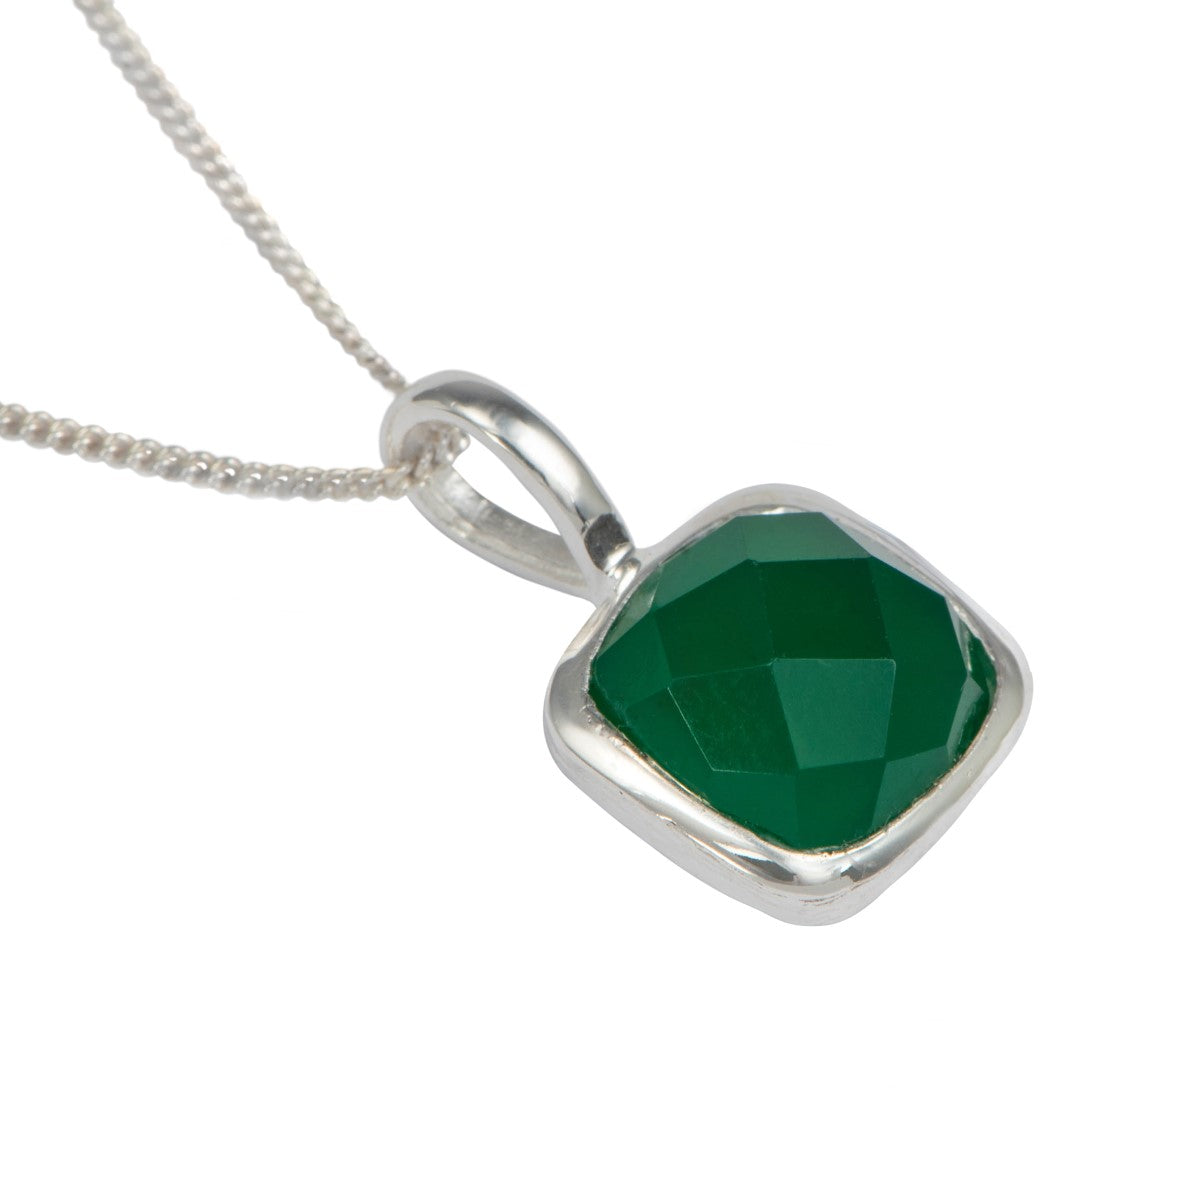 Sterling Silver Pendant Necklace with a Faceted Square Gemstone - Green Onyx